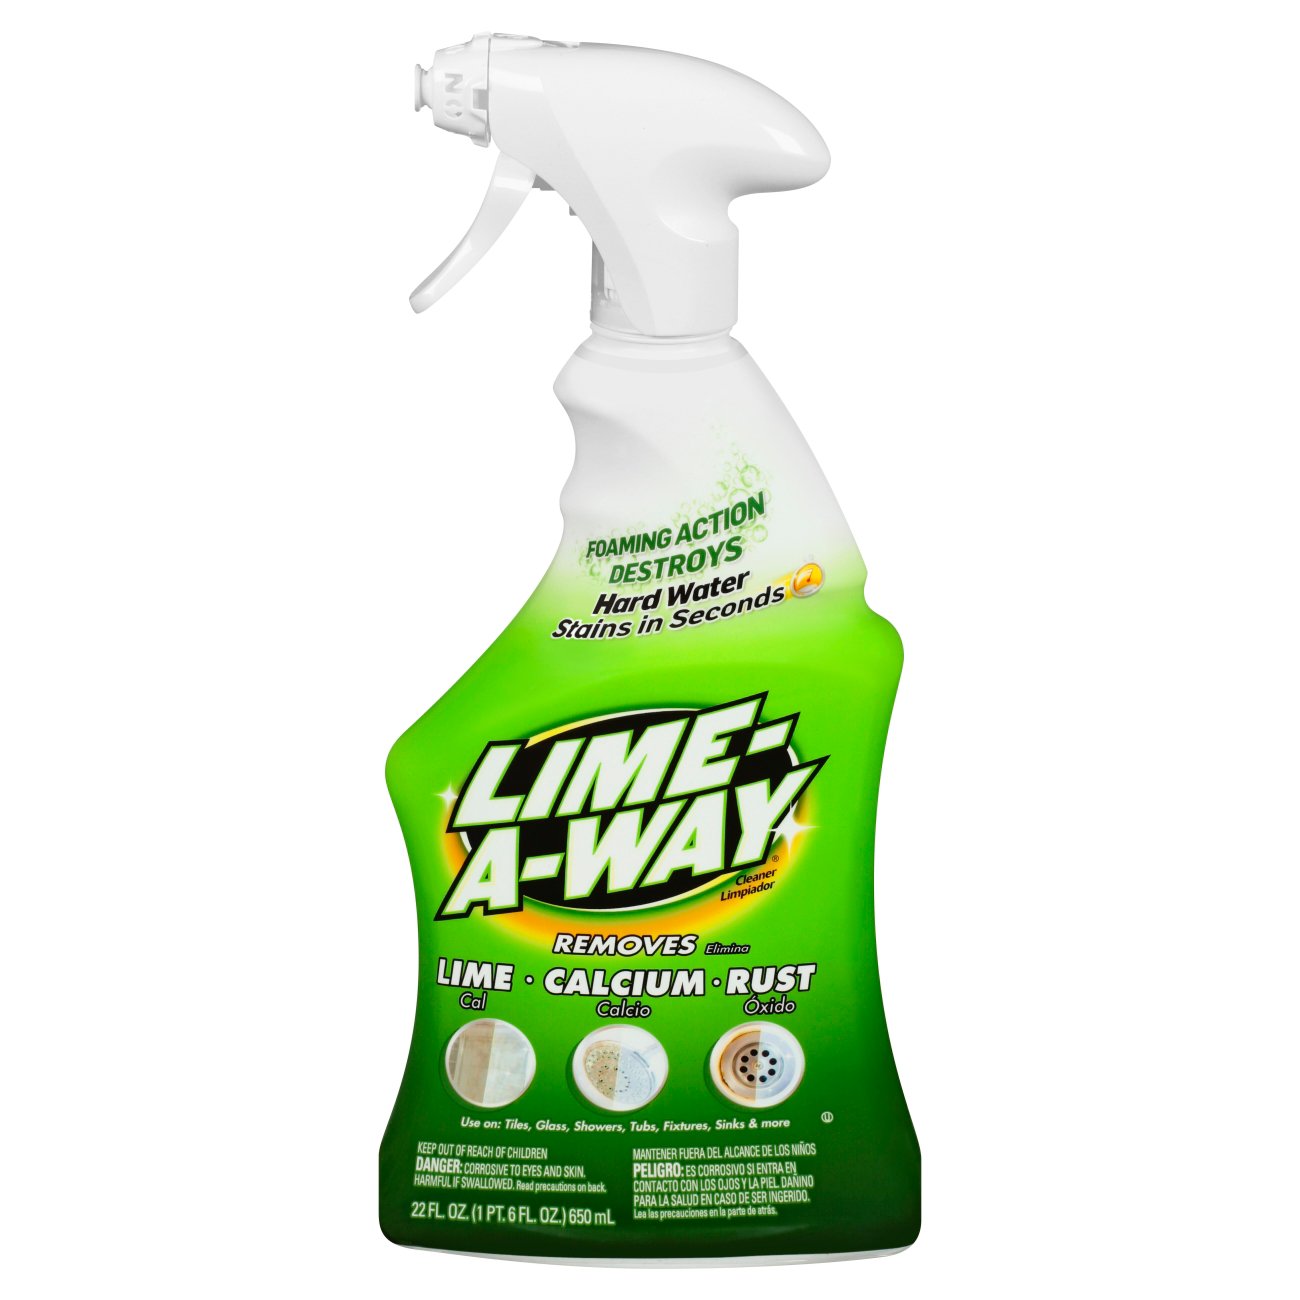 Sprayway Foaming Glass Cleaner Spray - Shop All Purpose Cleaners at H-E-B